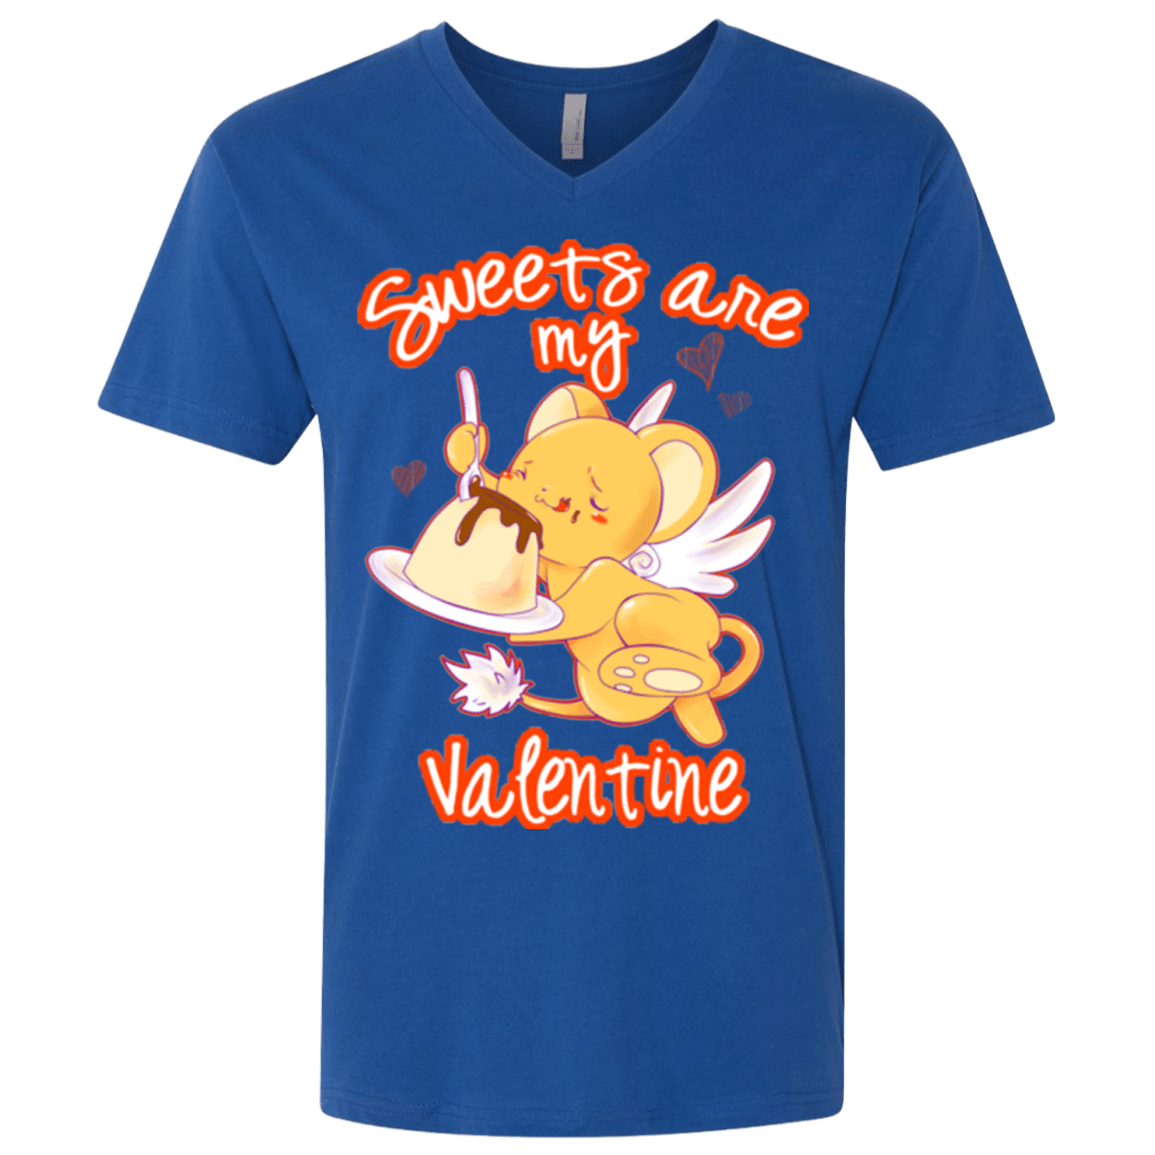 T-Shirts Royal / X-Small Sweets are my Valentine Men's Premium V-Neck